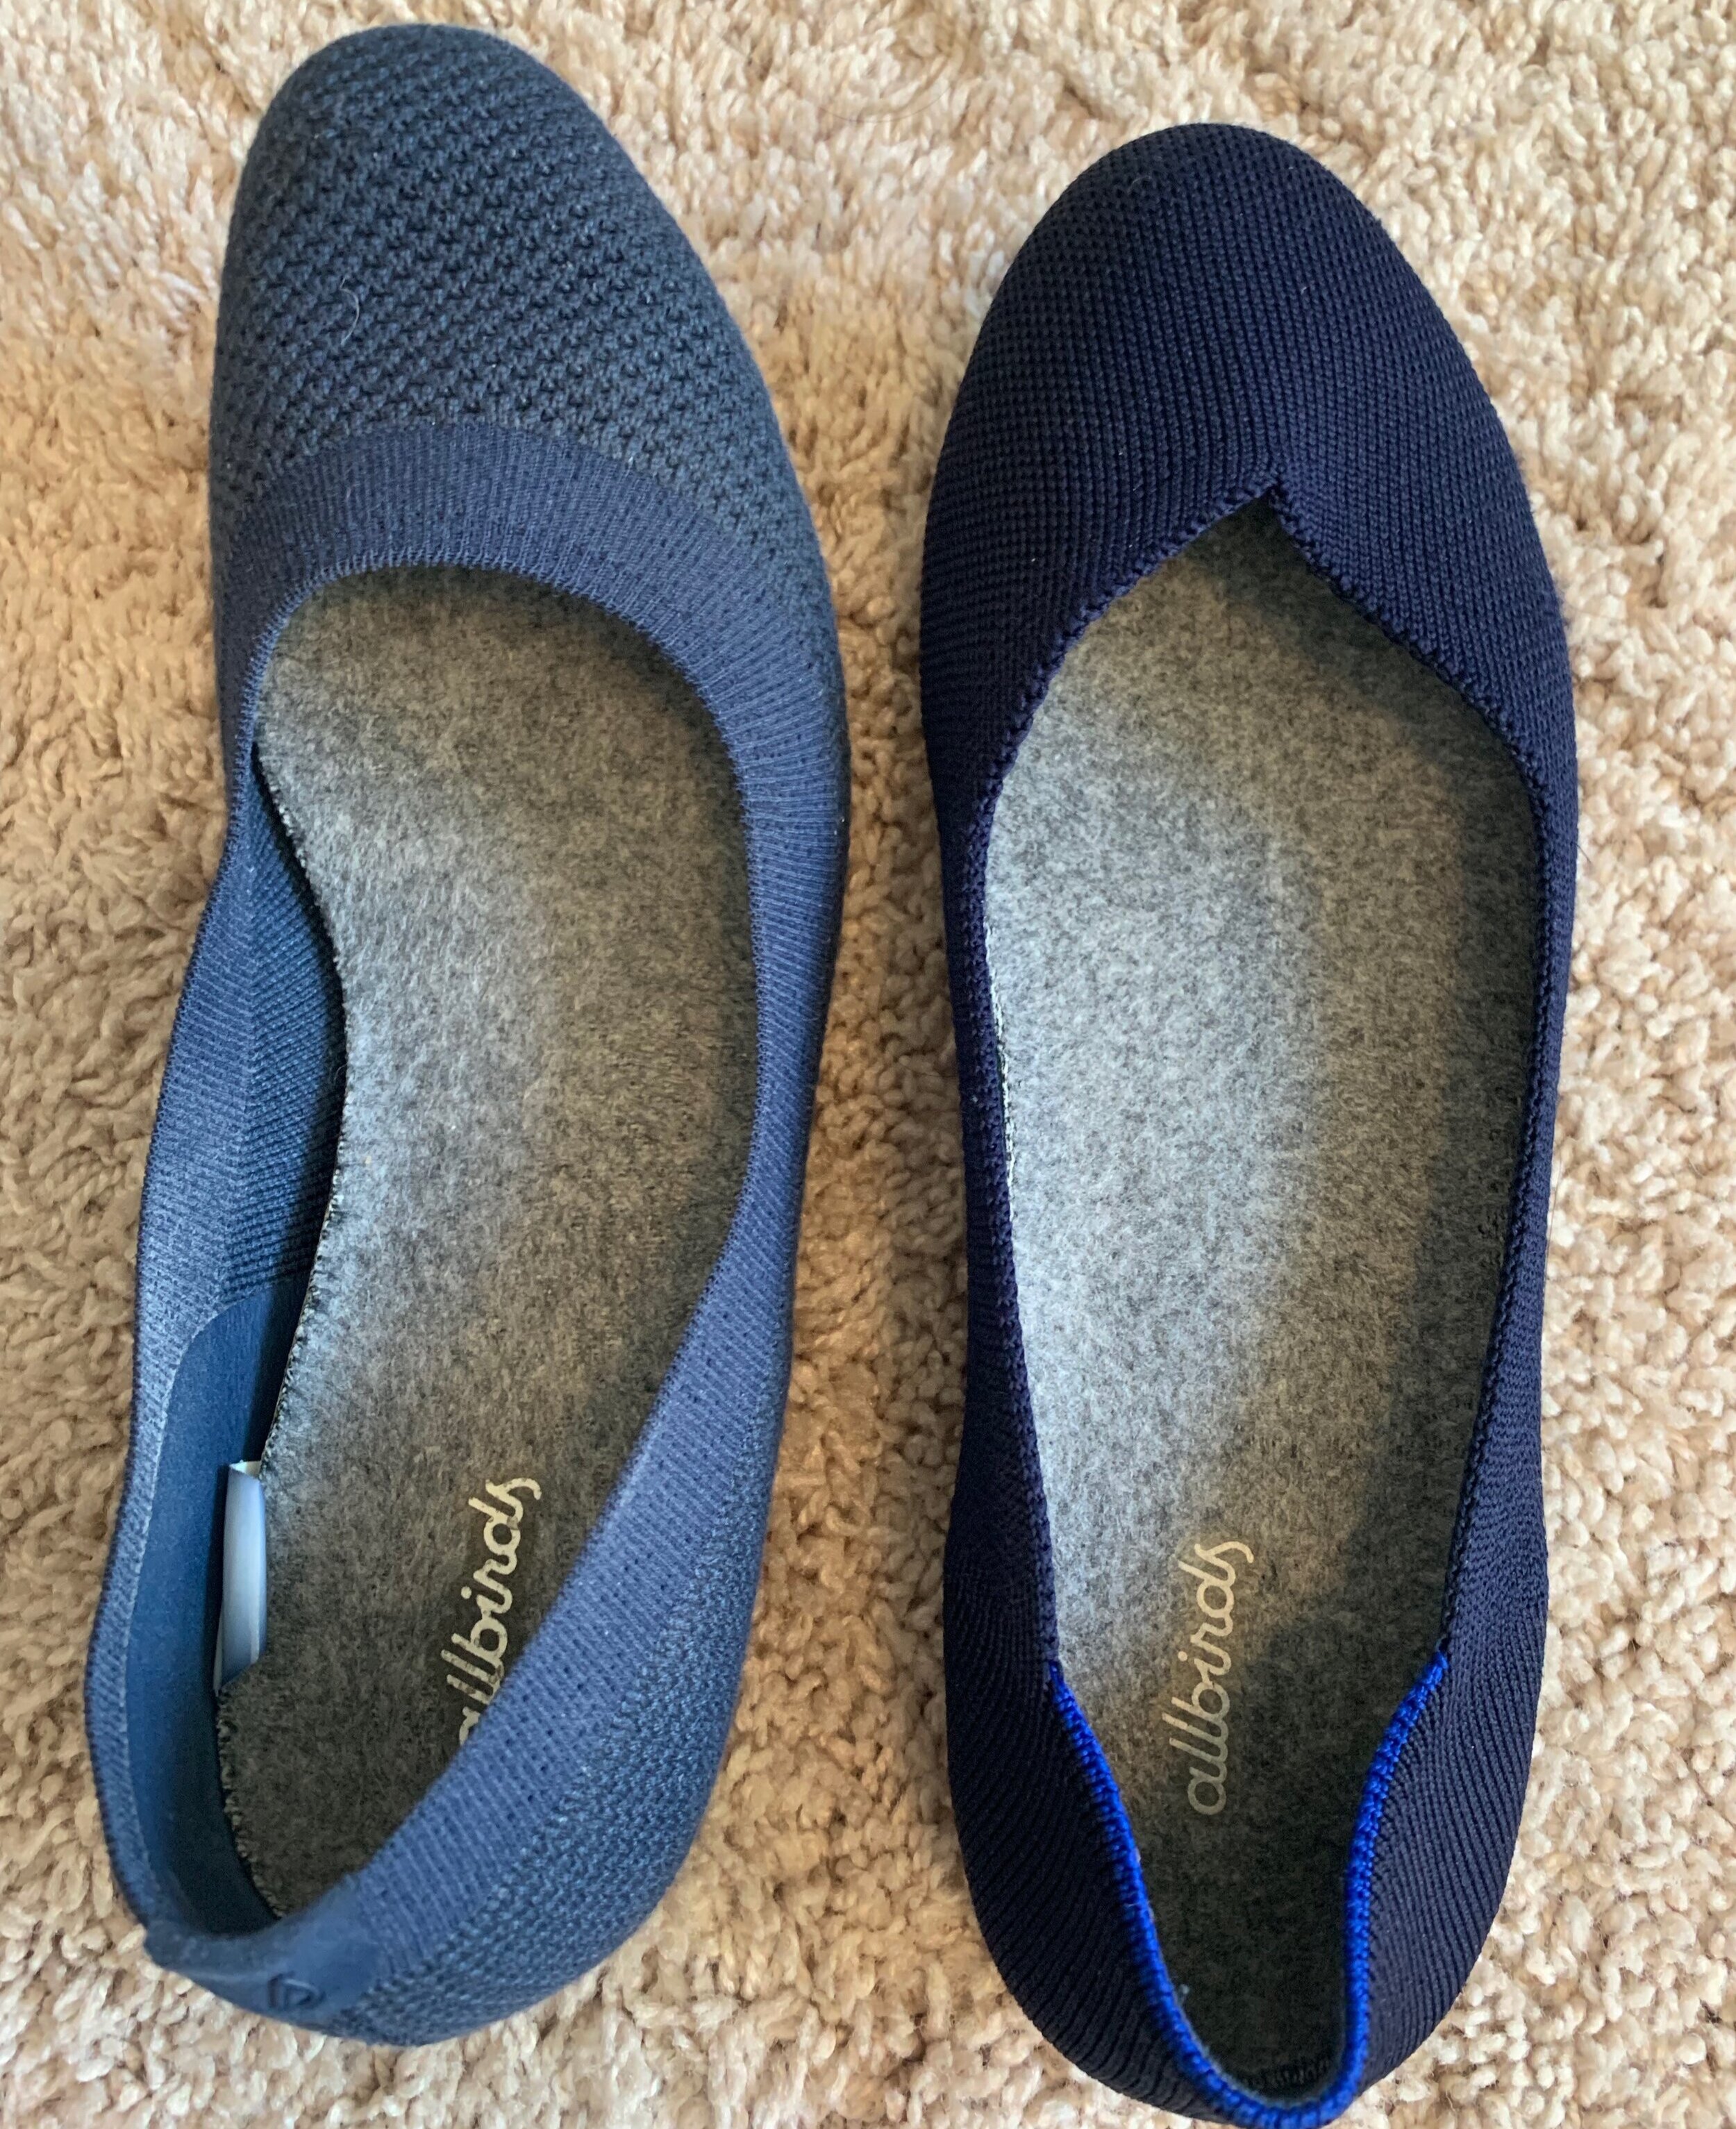 How I put my Allbirds insoles into my 